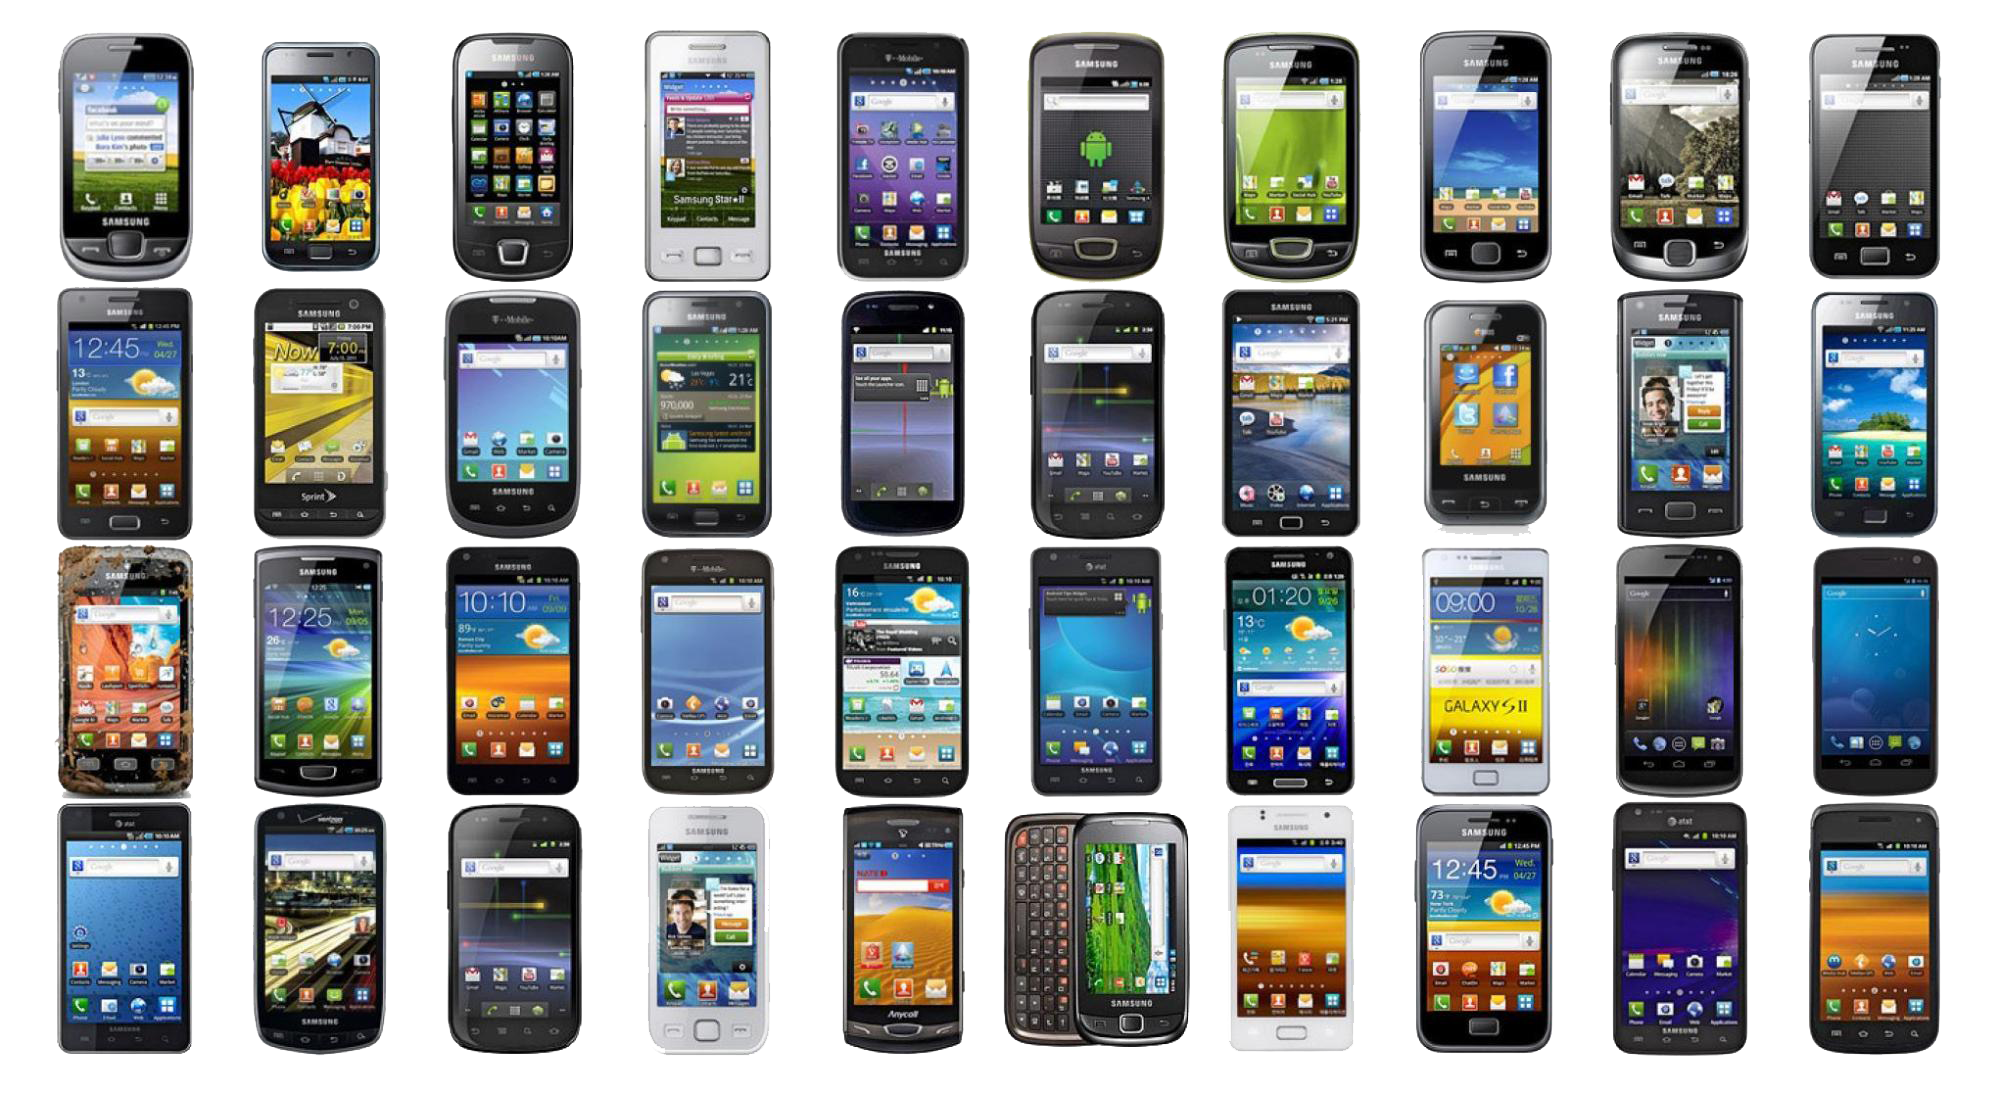 Some of the smartphones released by Samsung during 2010